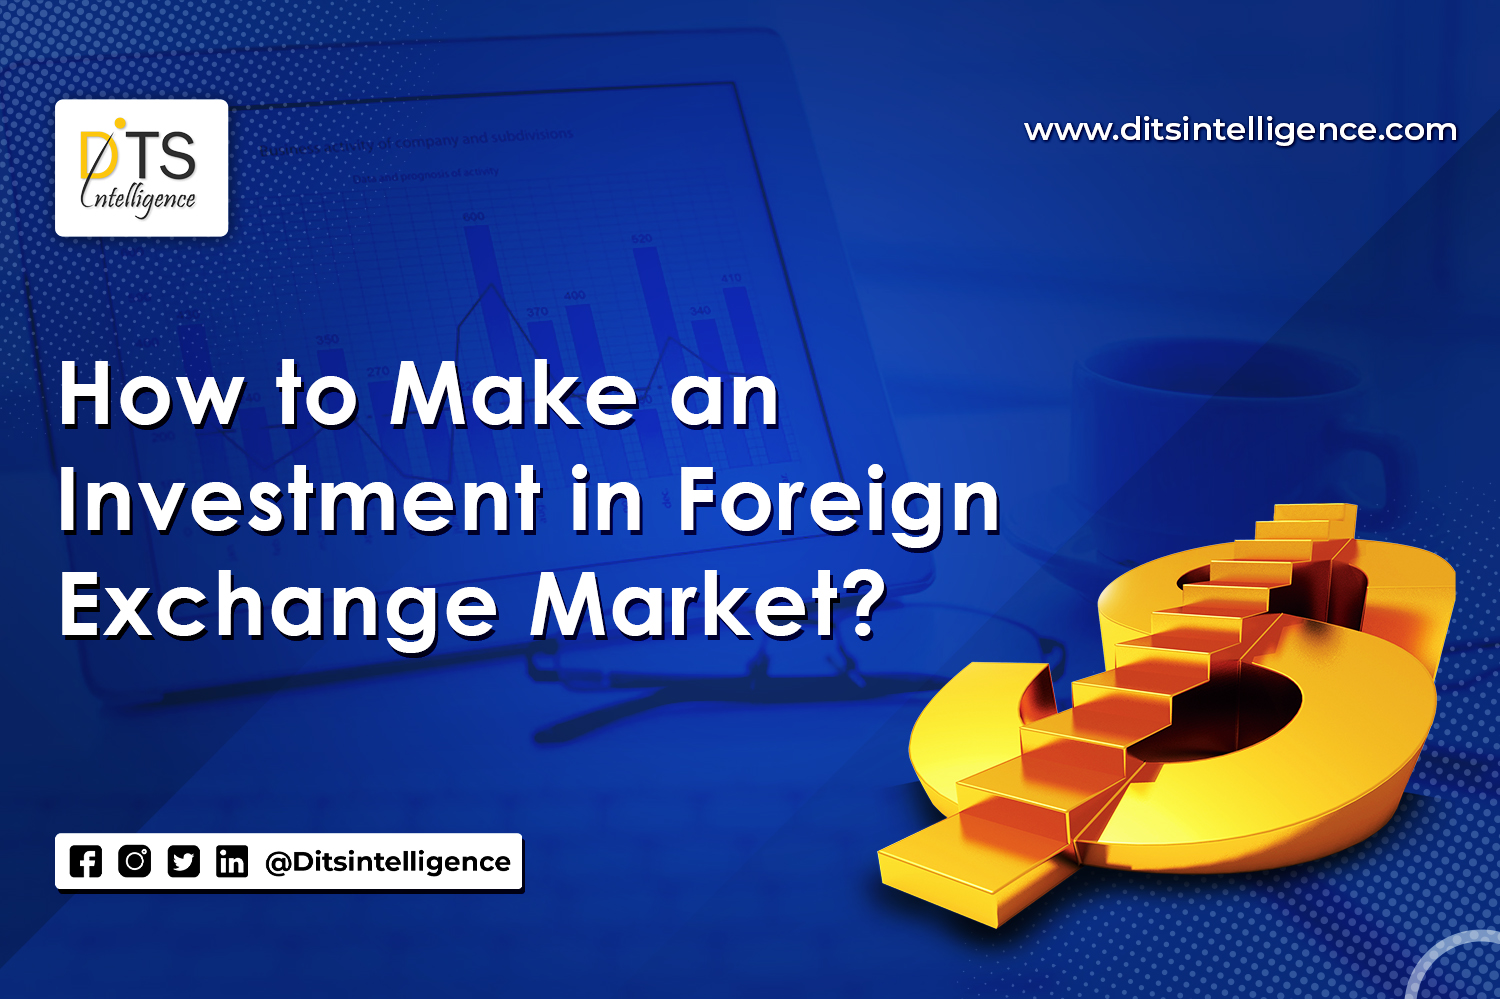 How to Make an Investment in Foreign Exchange Market?